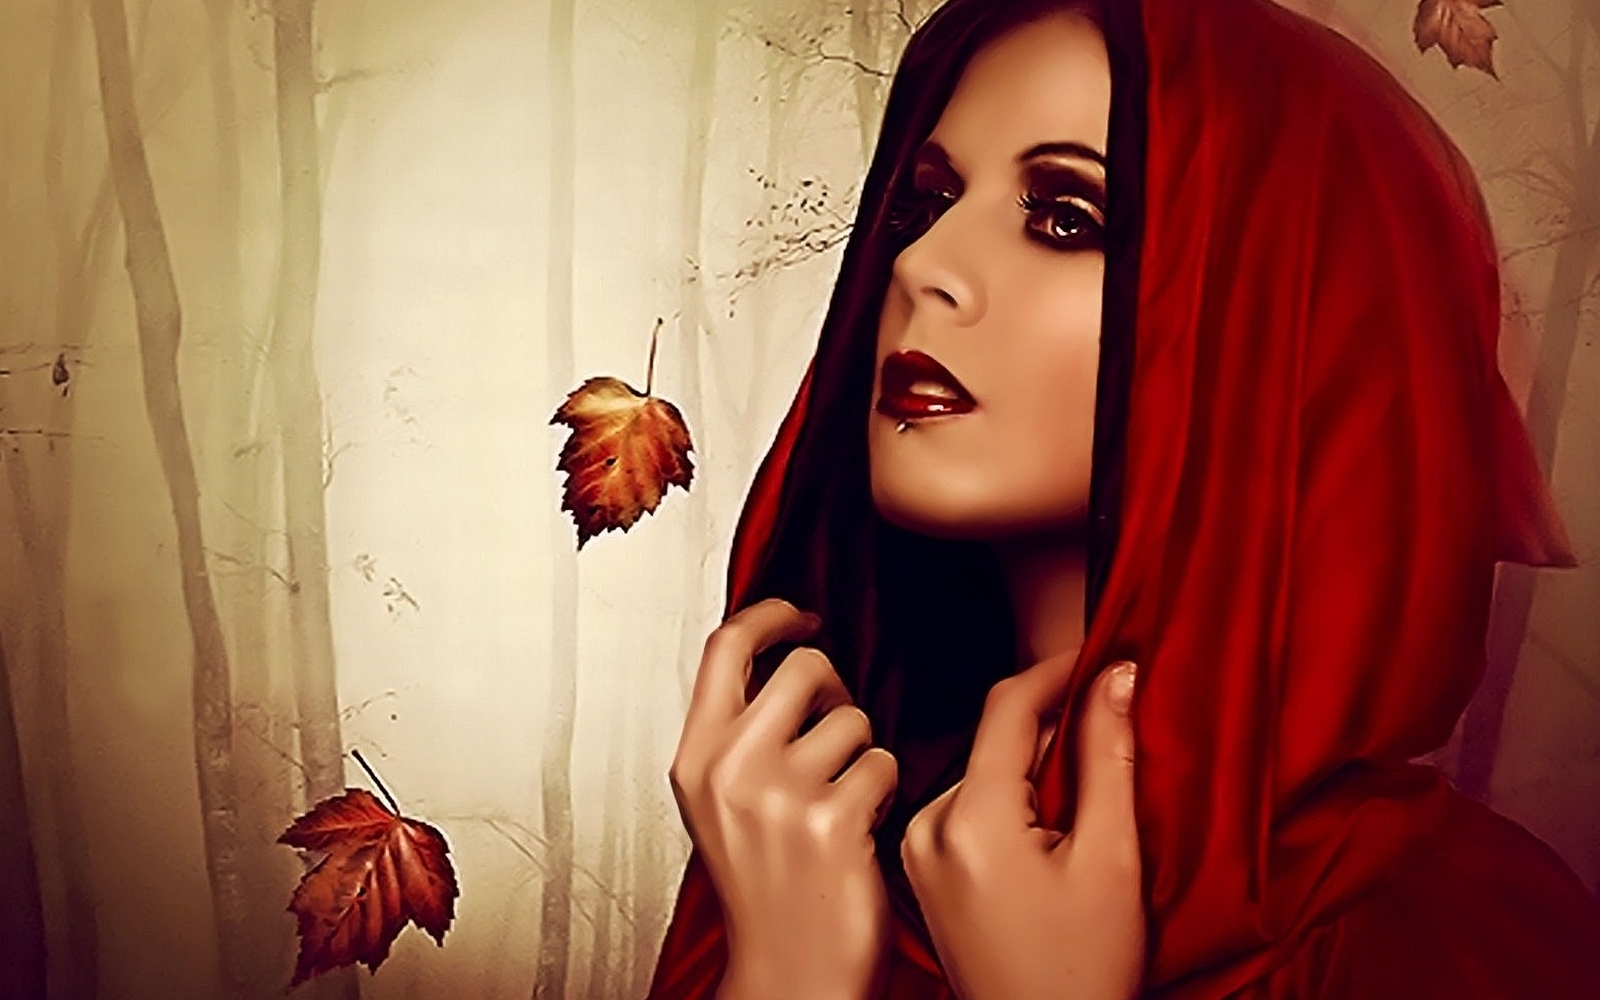 Fantasy Red Riding Hood Wallpapers